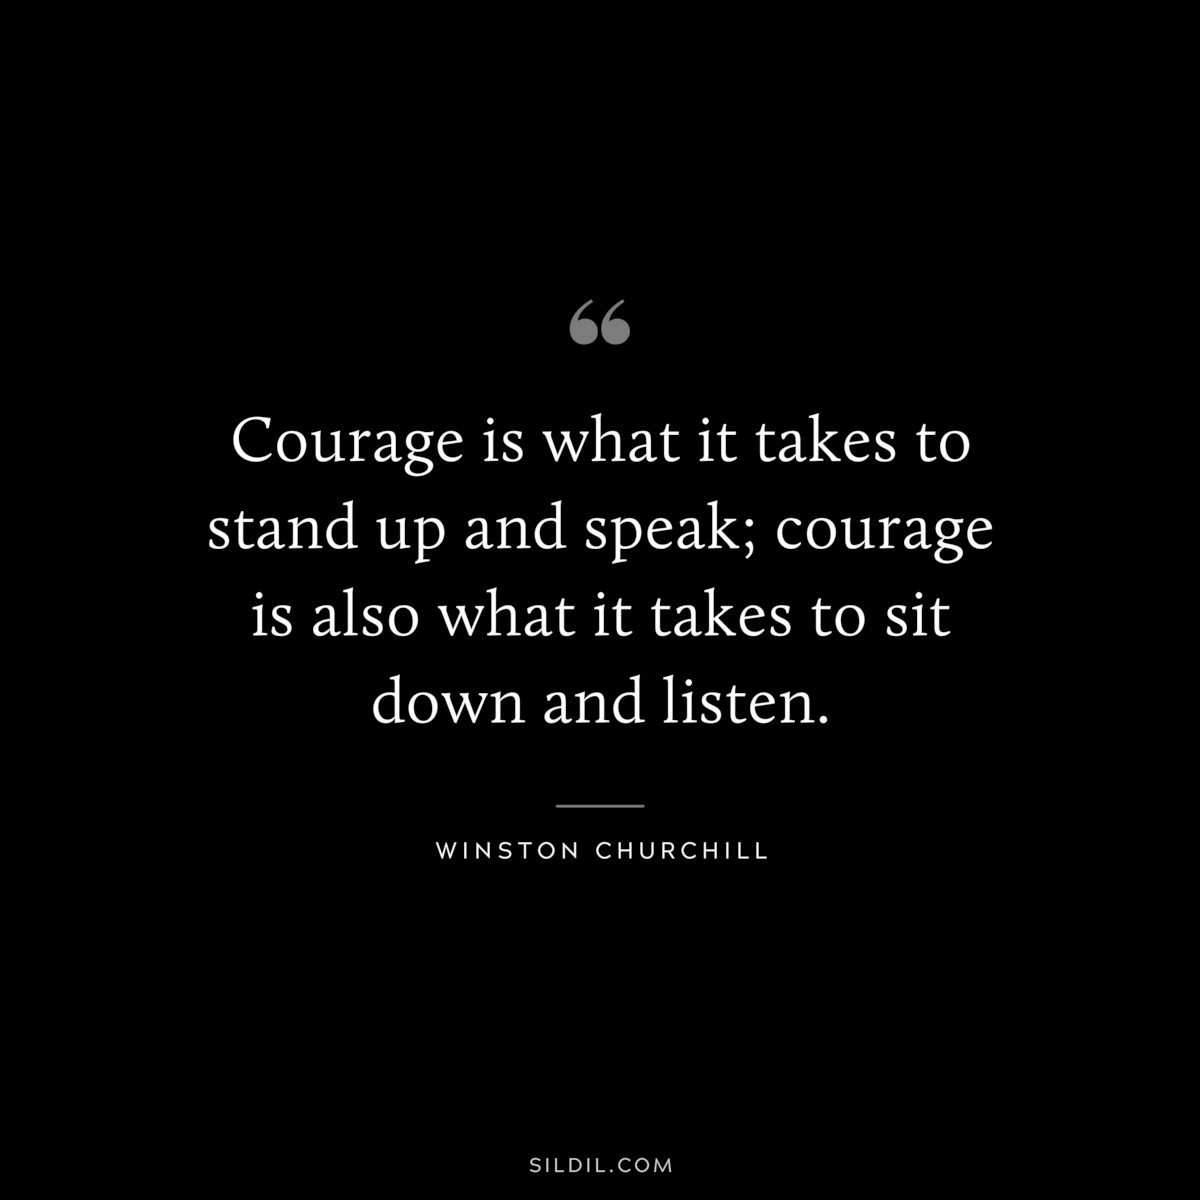 Courage is what it takes to stand up and speak; courage is also what it takes to sit down and listen. ― Winston Churchill